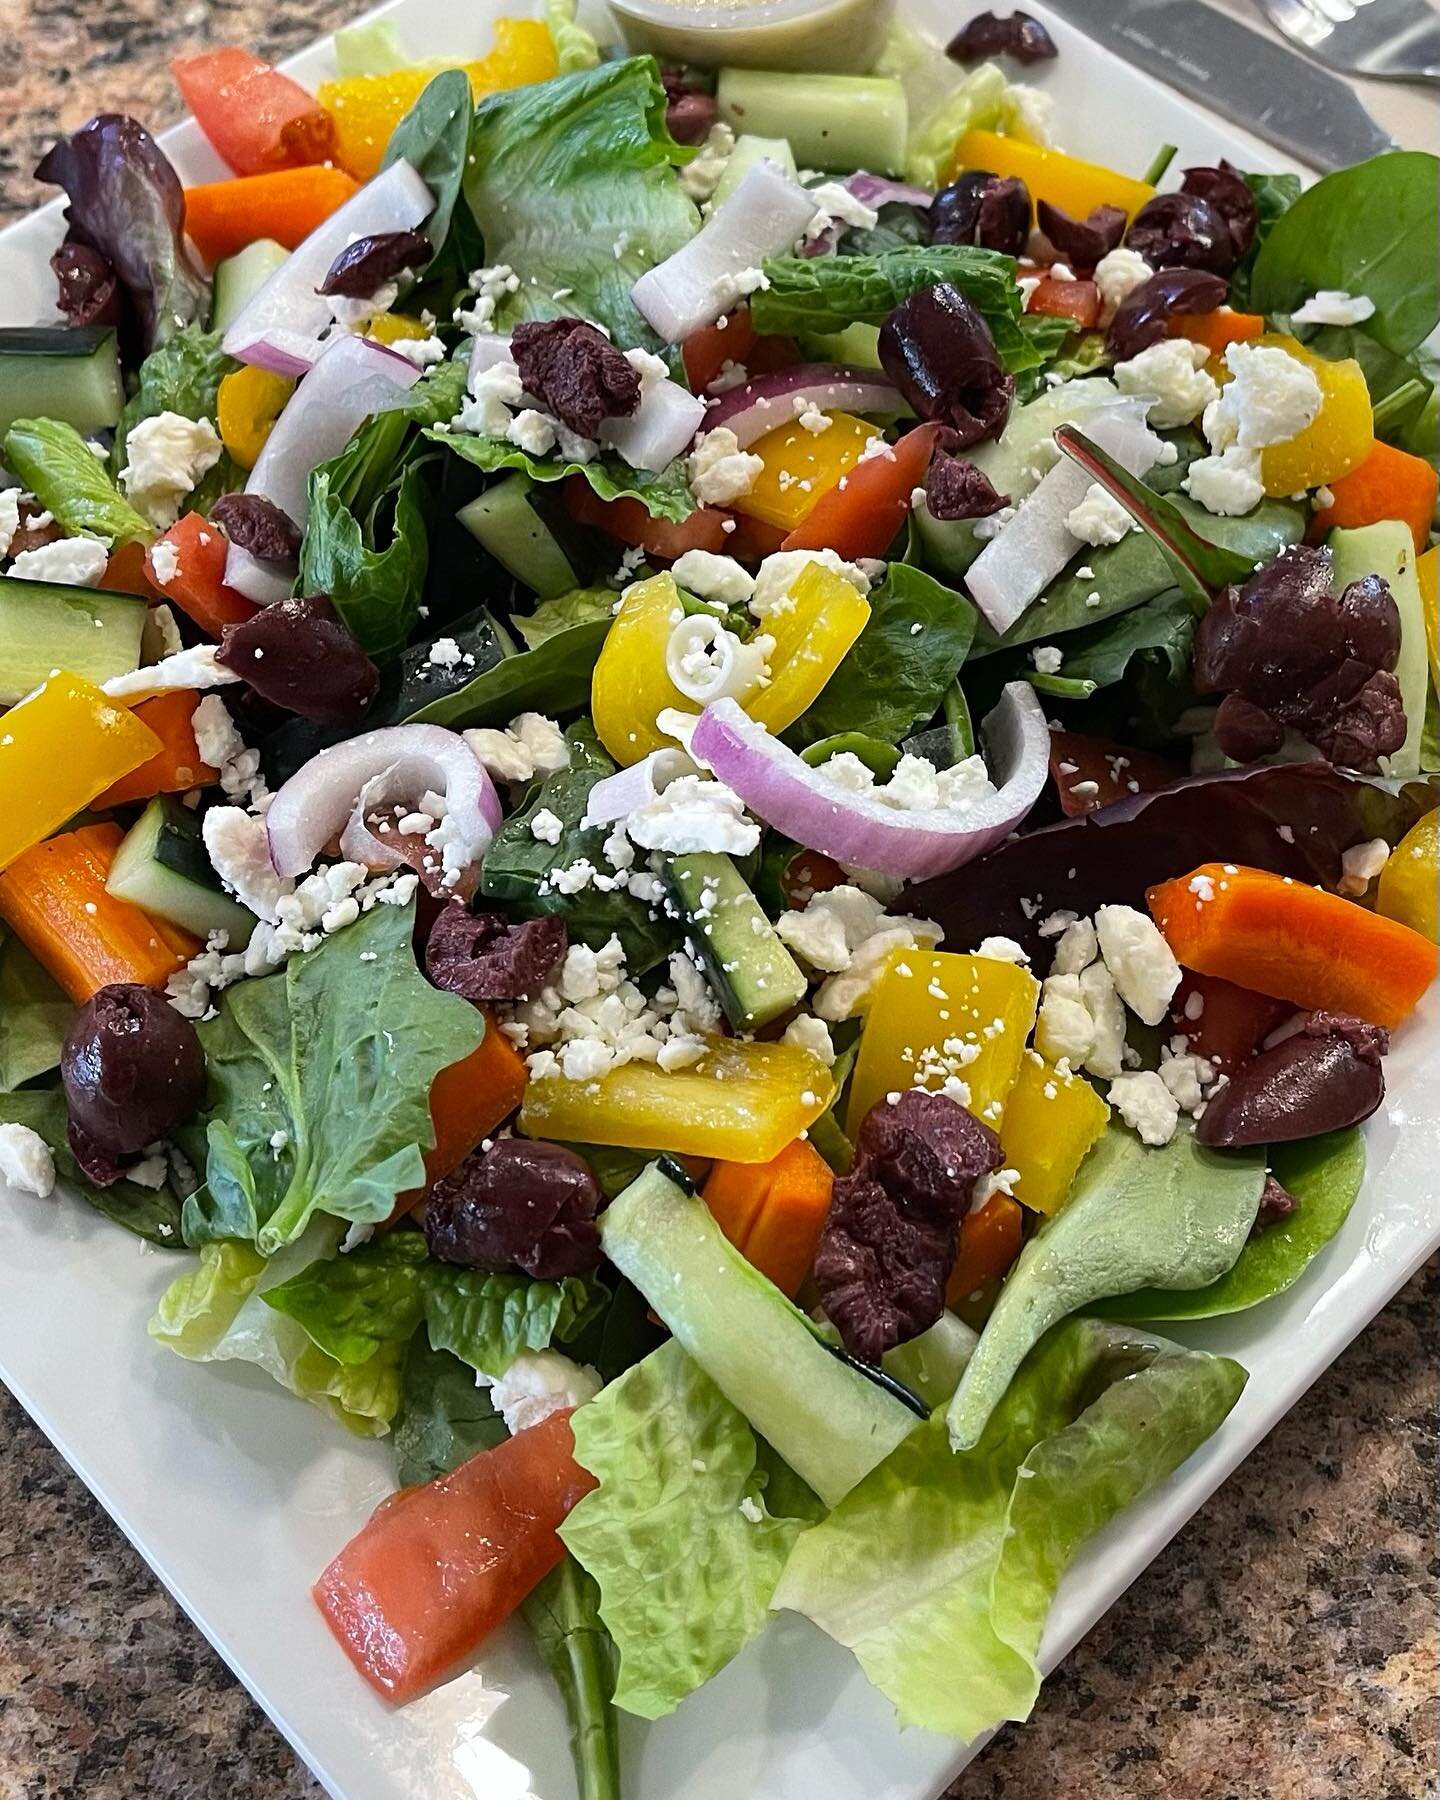 Lunch is just around the corner. Grab a friend, swing on down and try one of our delicious salads! Packed with fresh greens, carrots, tomatoes, cucumbers, peppers and more! 
#saladjunkie #lunchtime